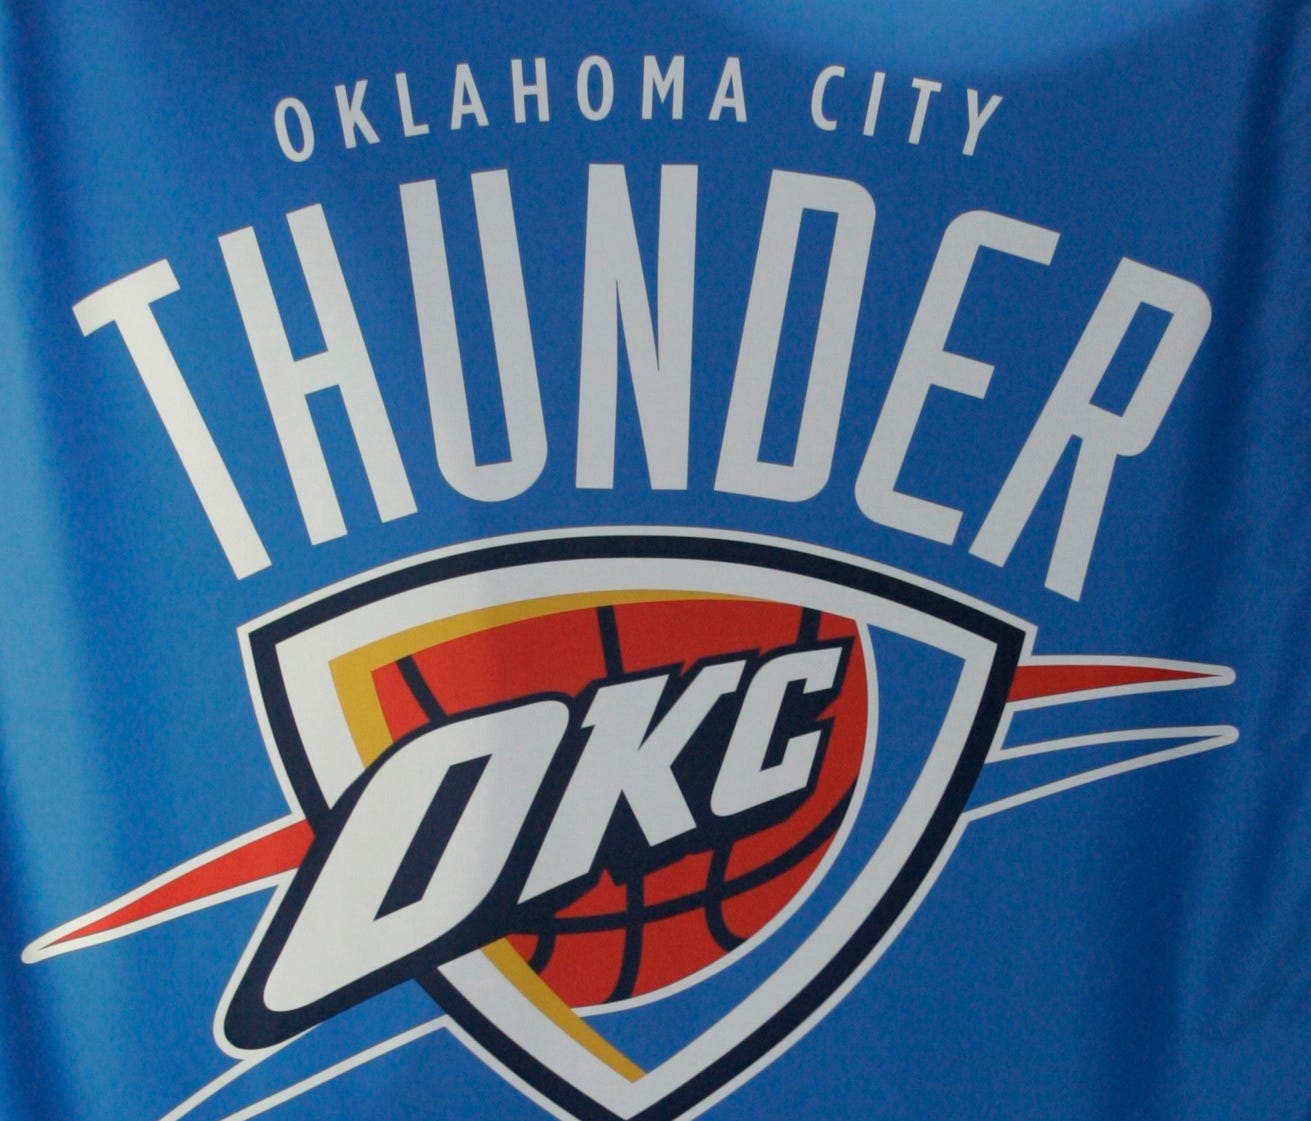 A banner with the name, logo and colors of the Oklahoma City Thunder.